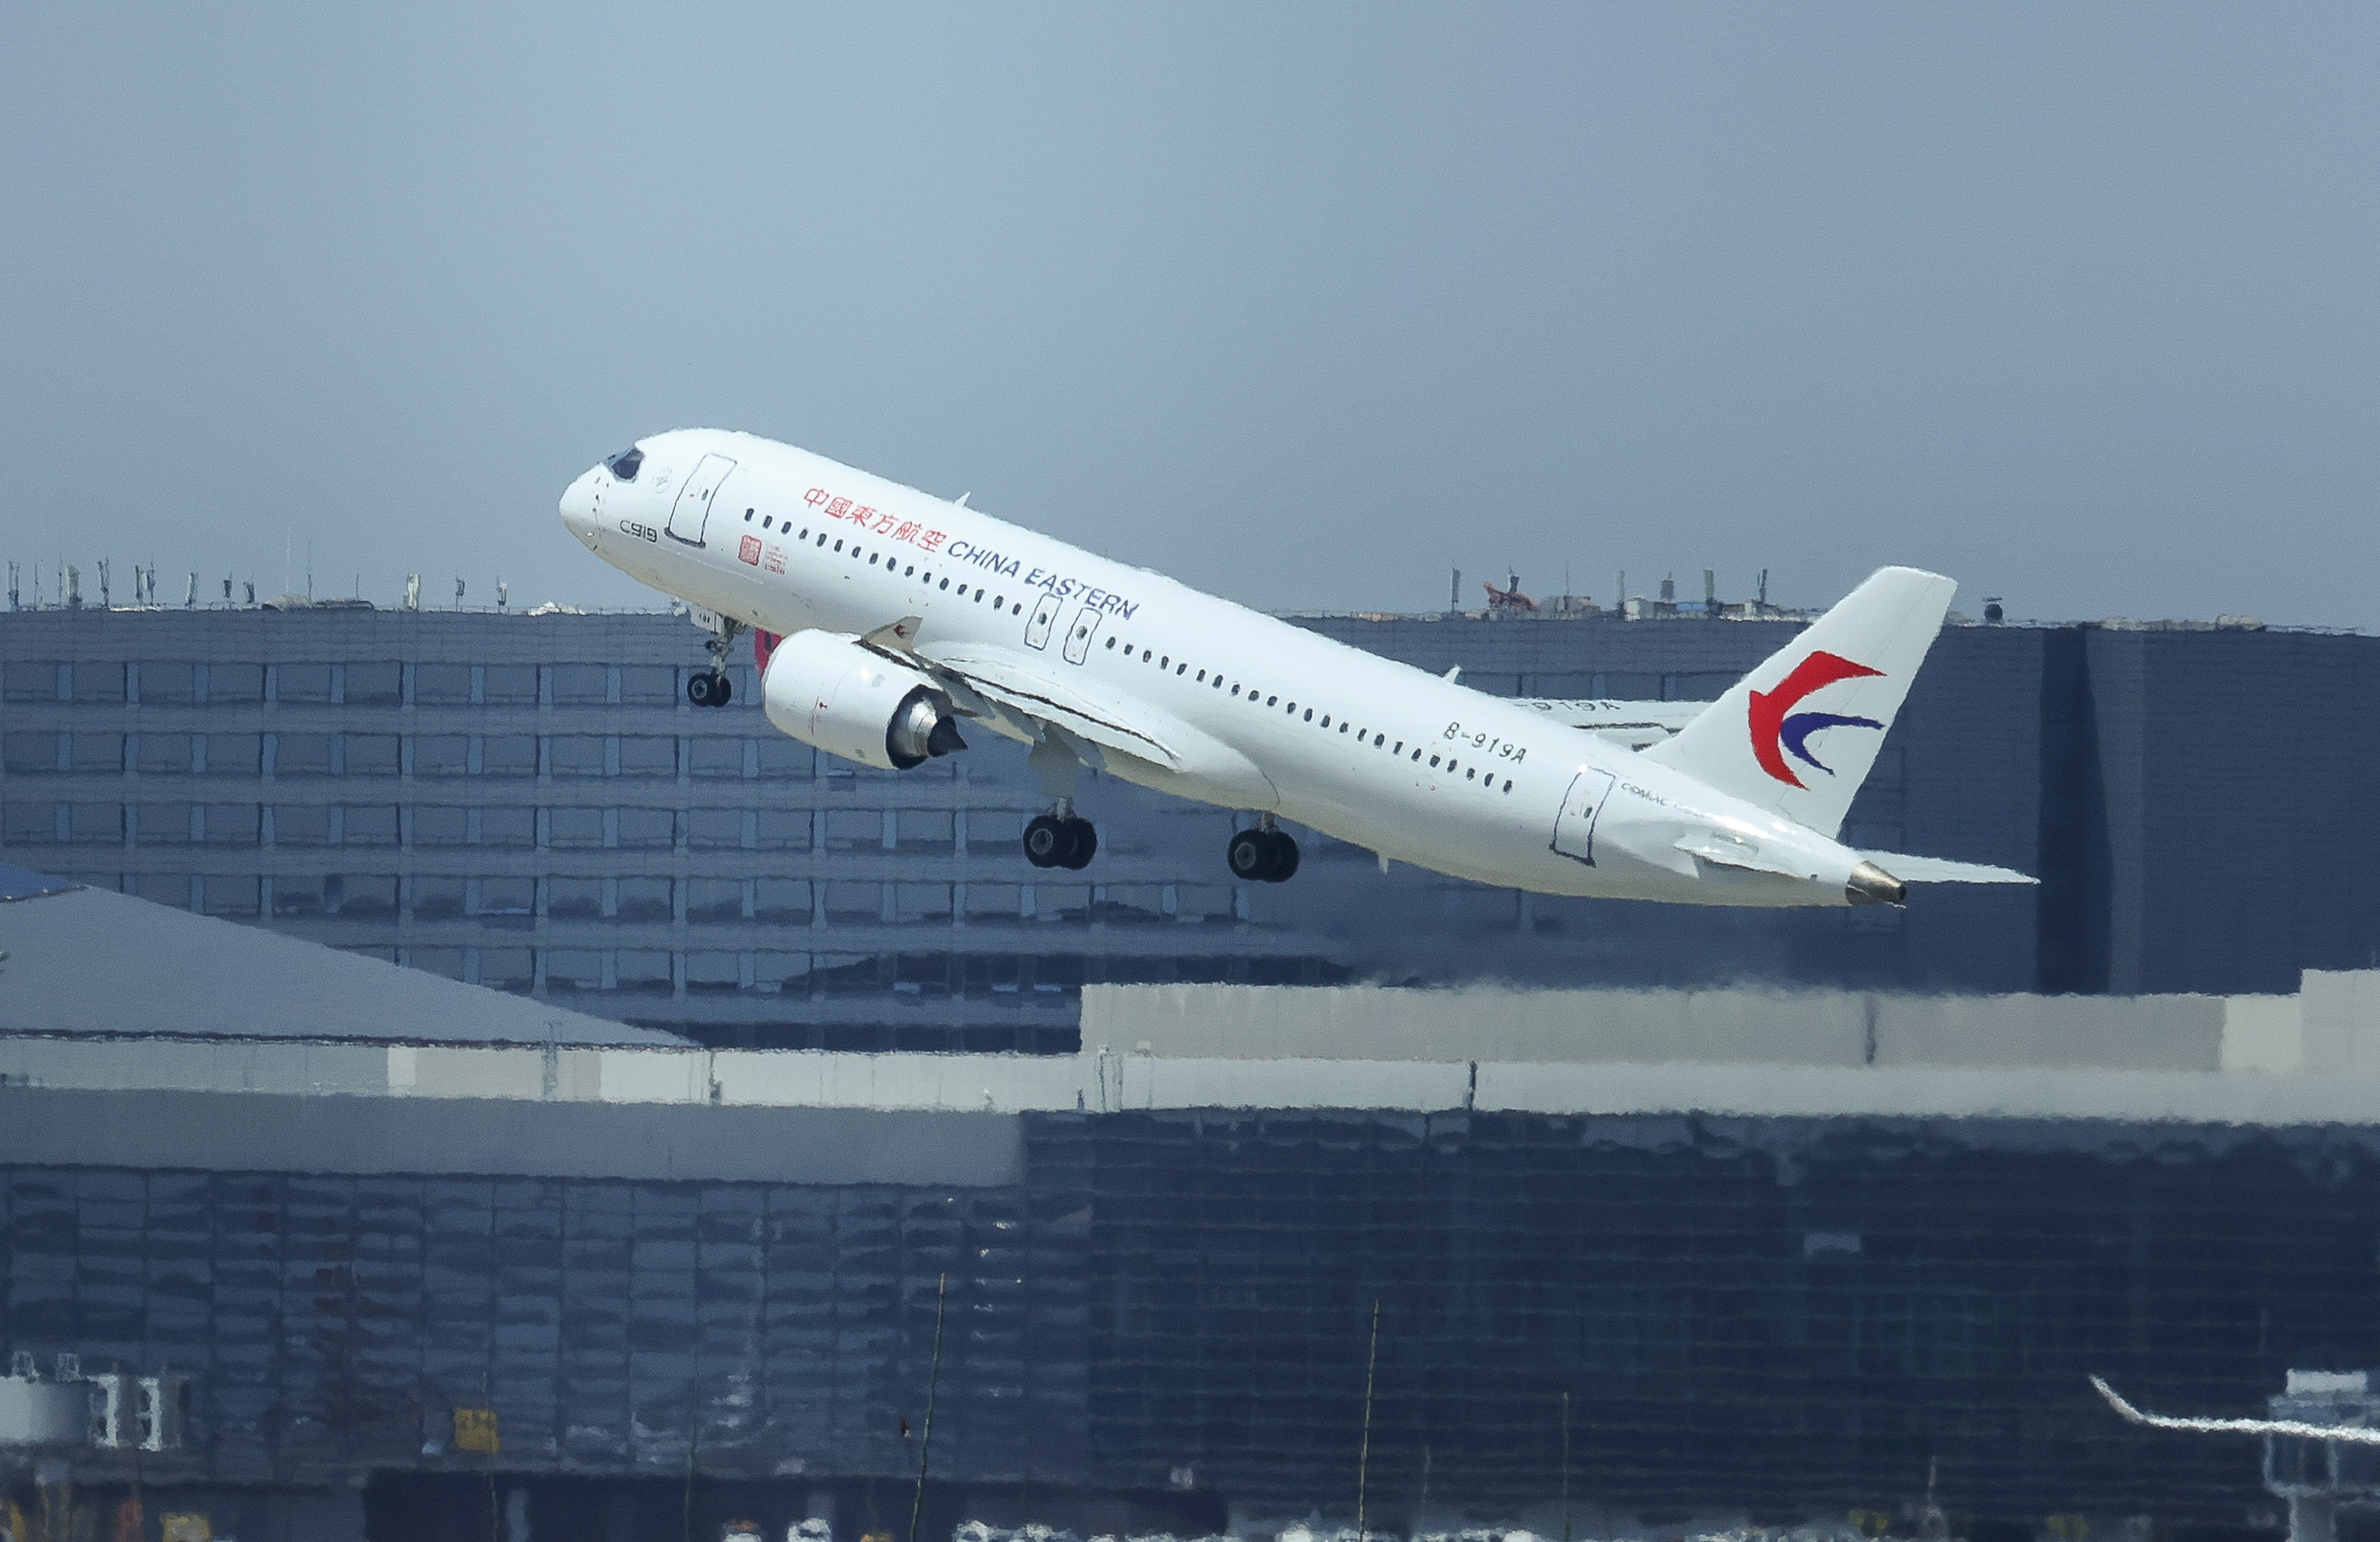 Bearing the symbolic number MU9191, the flight operated by China Eastern Airlines and carrying more than 130 passengers travelled between Shanghai and Beijing. Photo: Xinhua